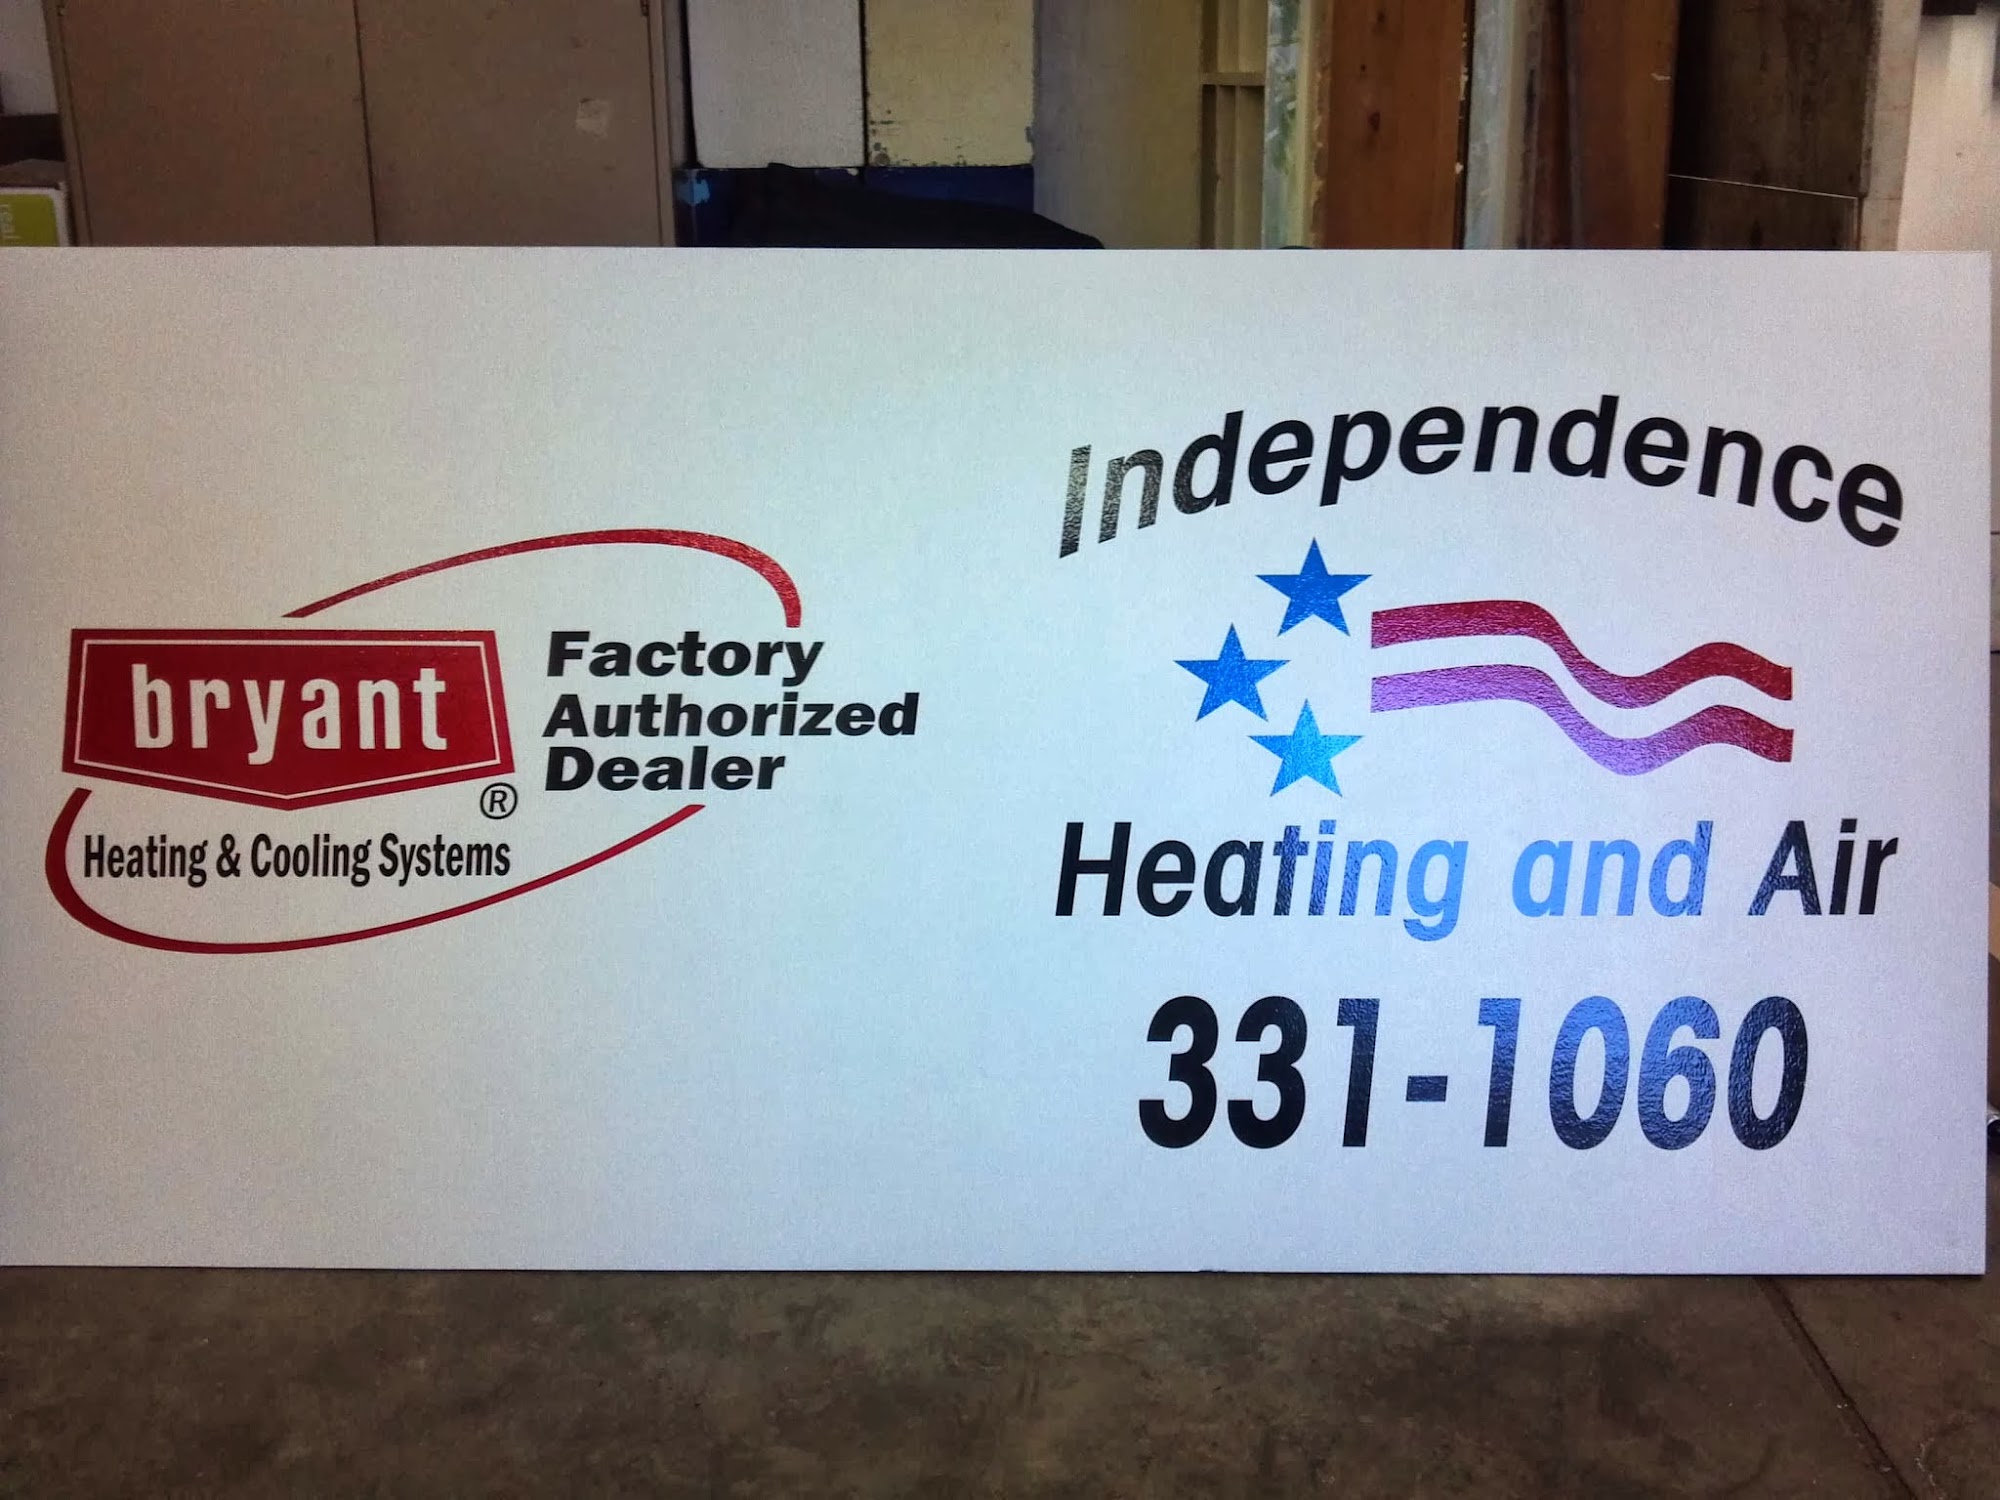 Independence Heating and Air, Inc. 914 N 10th St, Independence Kansas 67301